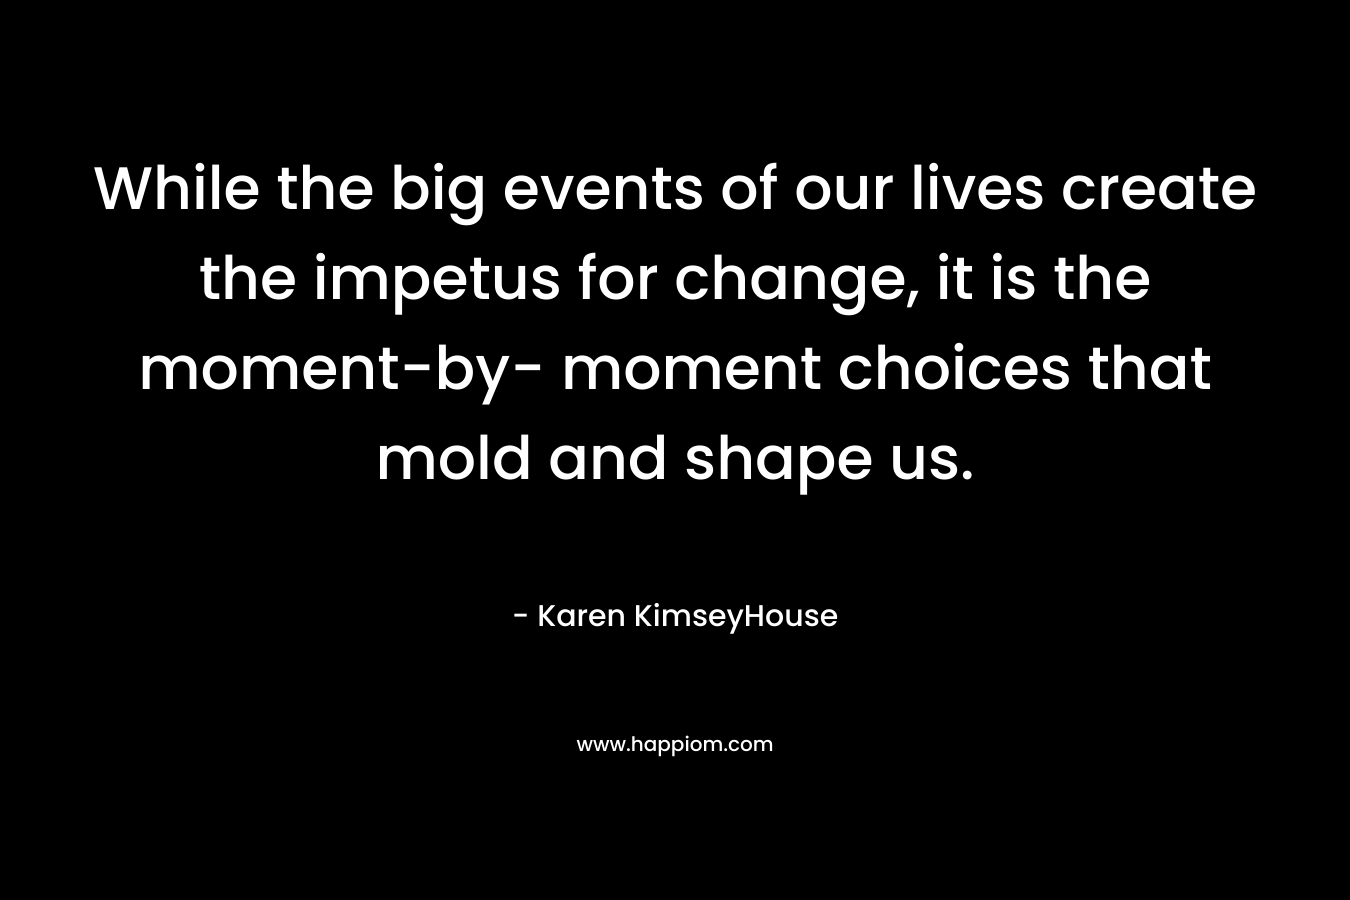 While the big events of our lives create the impetus for change, it is the moment-by- moment choices that mold and shape us. – Karen KimseyHouse